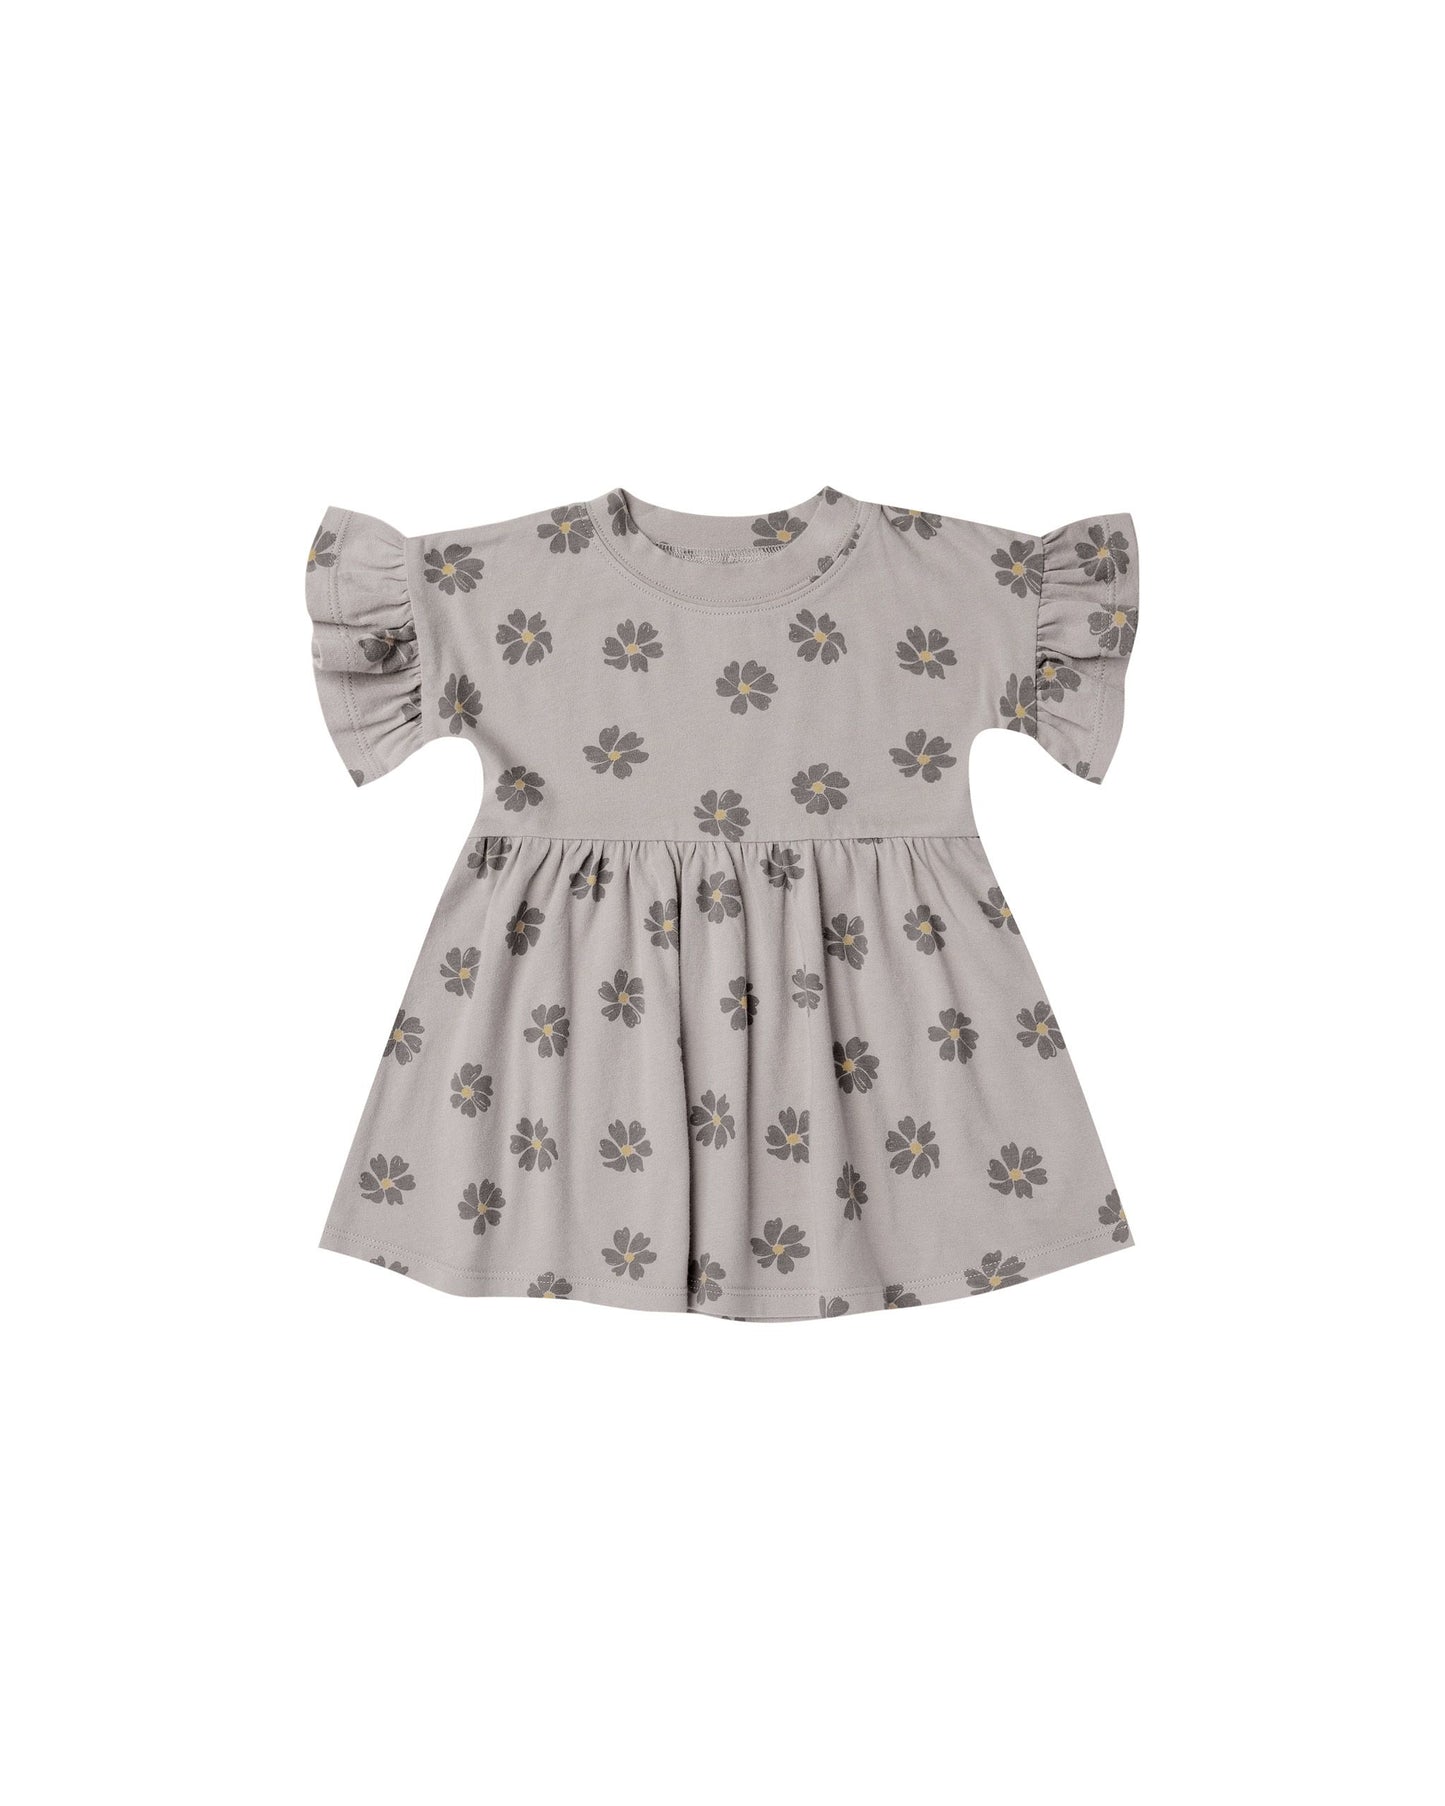 Babydoll Dress in Cloud Daisies  - Doodlebug's Children's Boutique